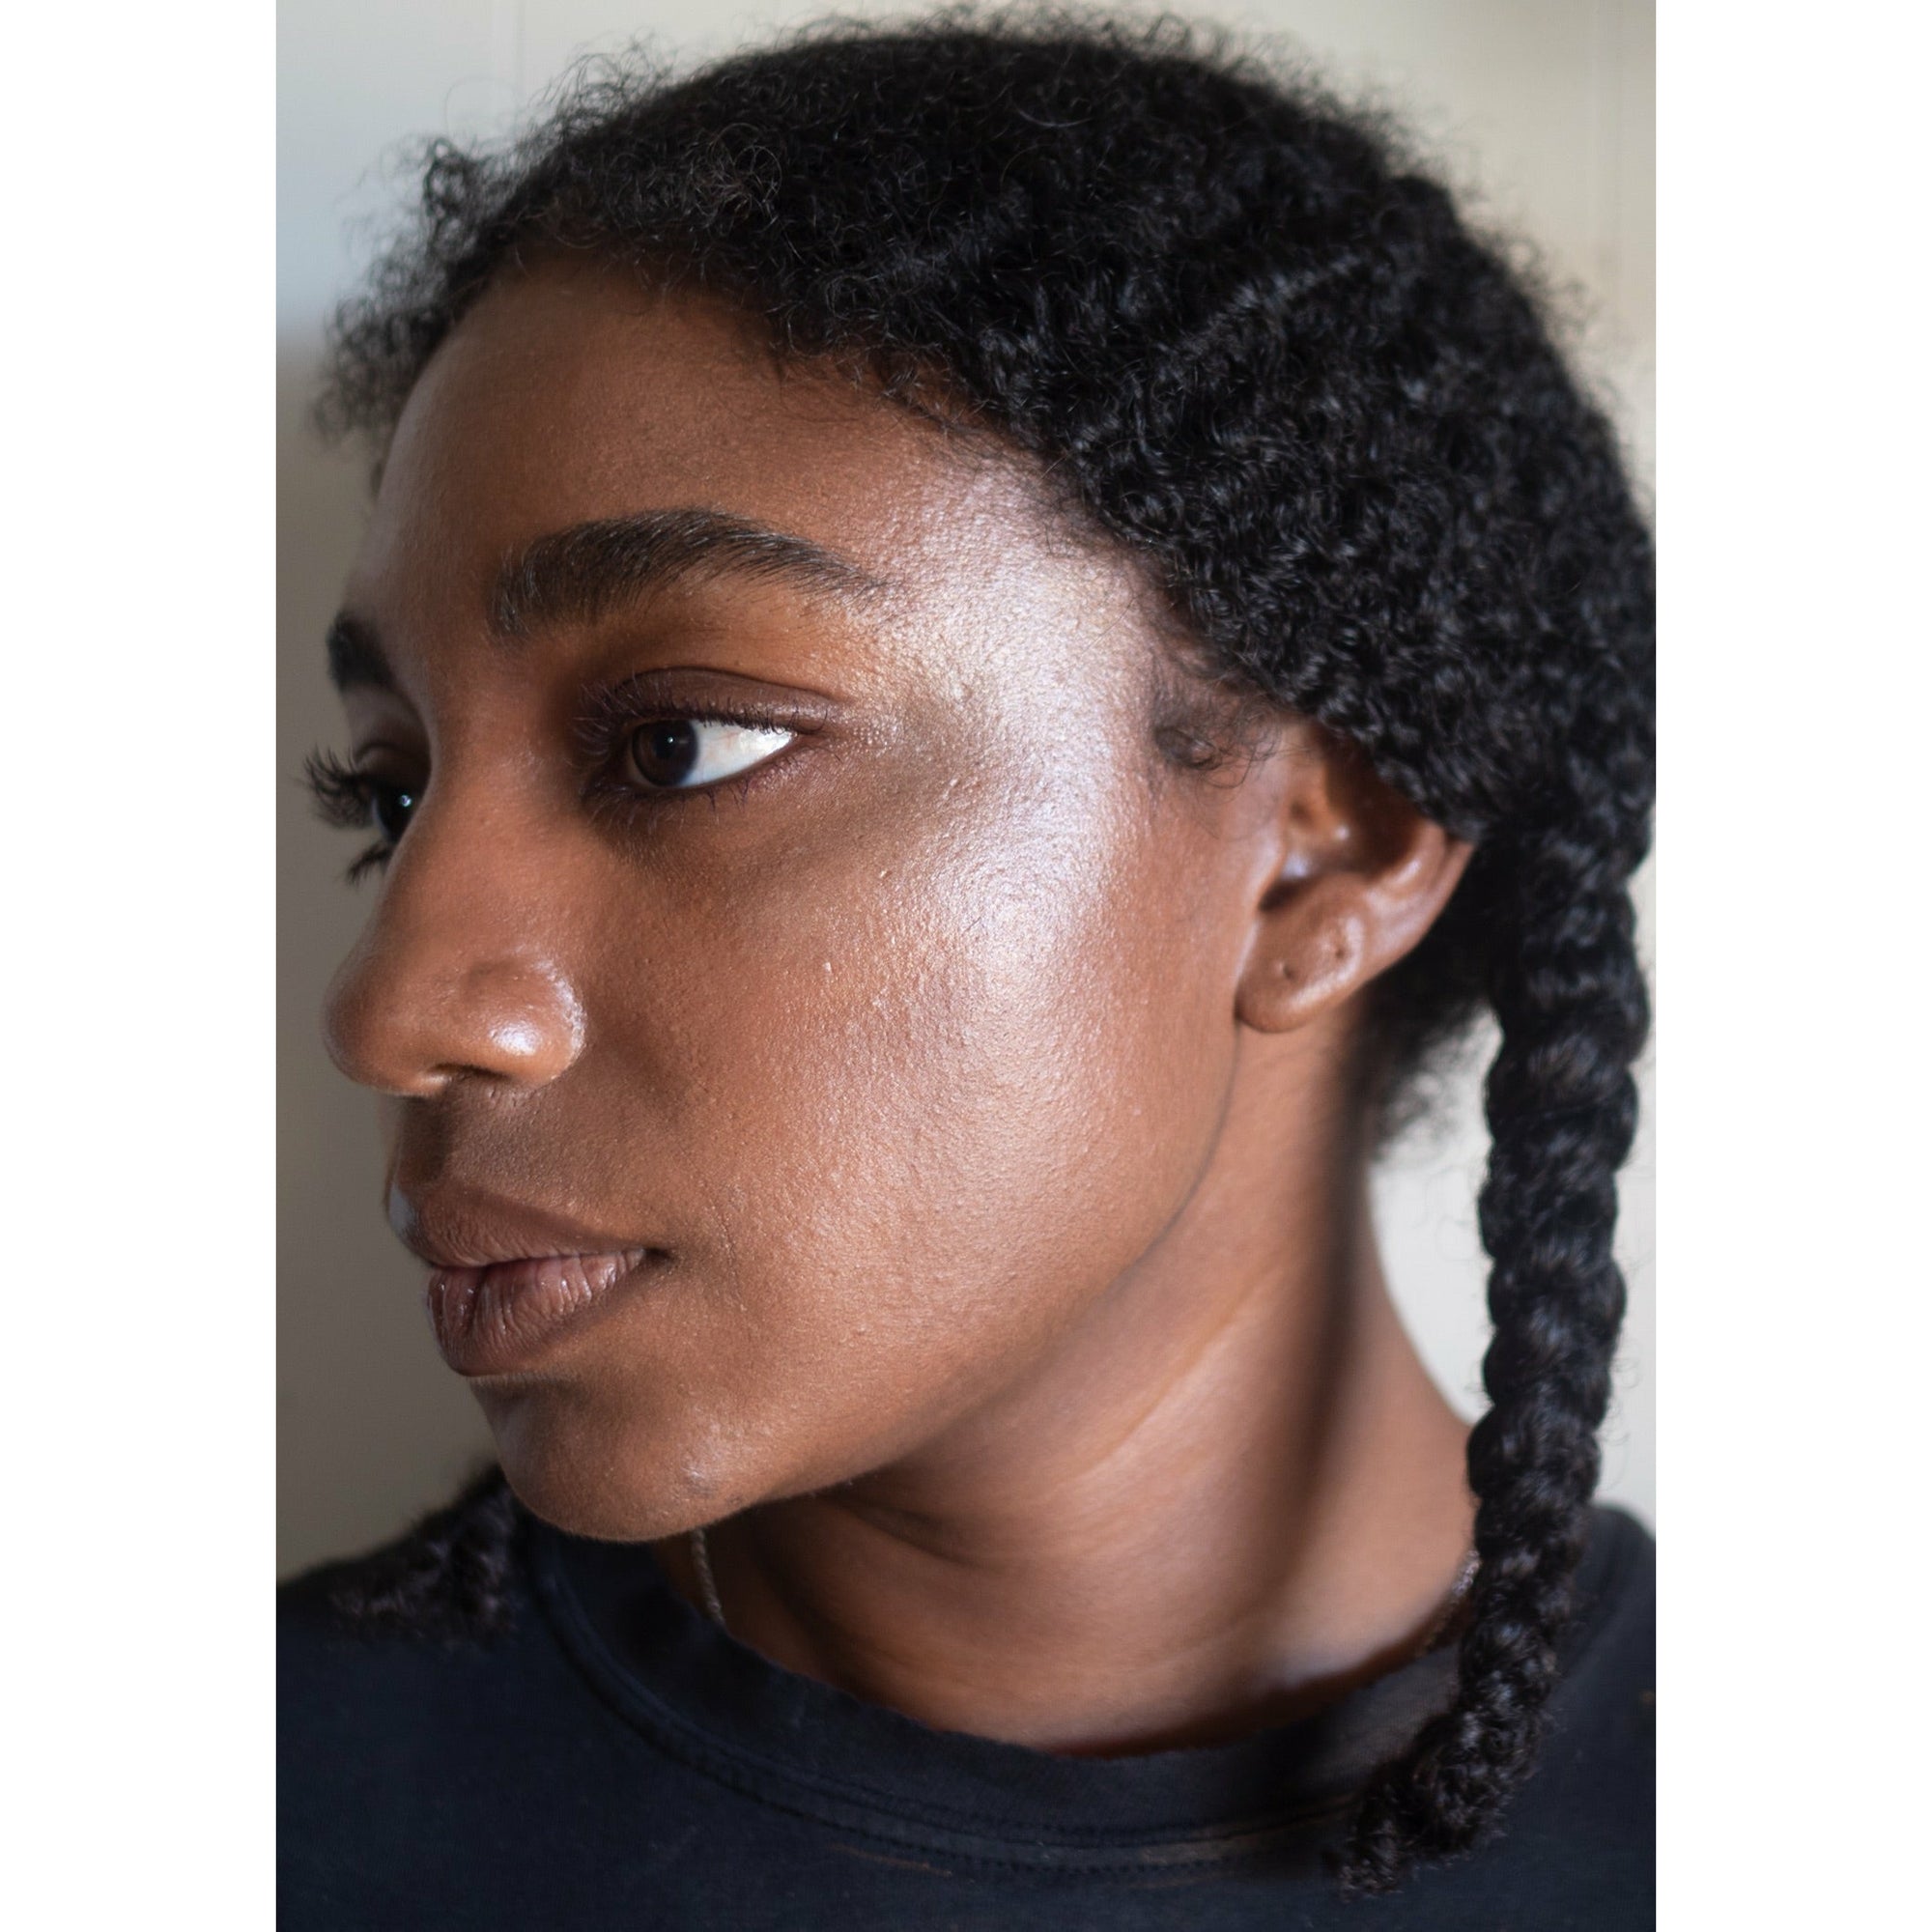 Woman&#39;s profile with beam face highlighter applied on cheekbone